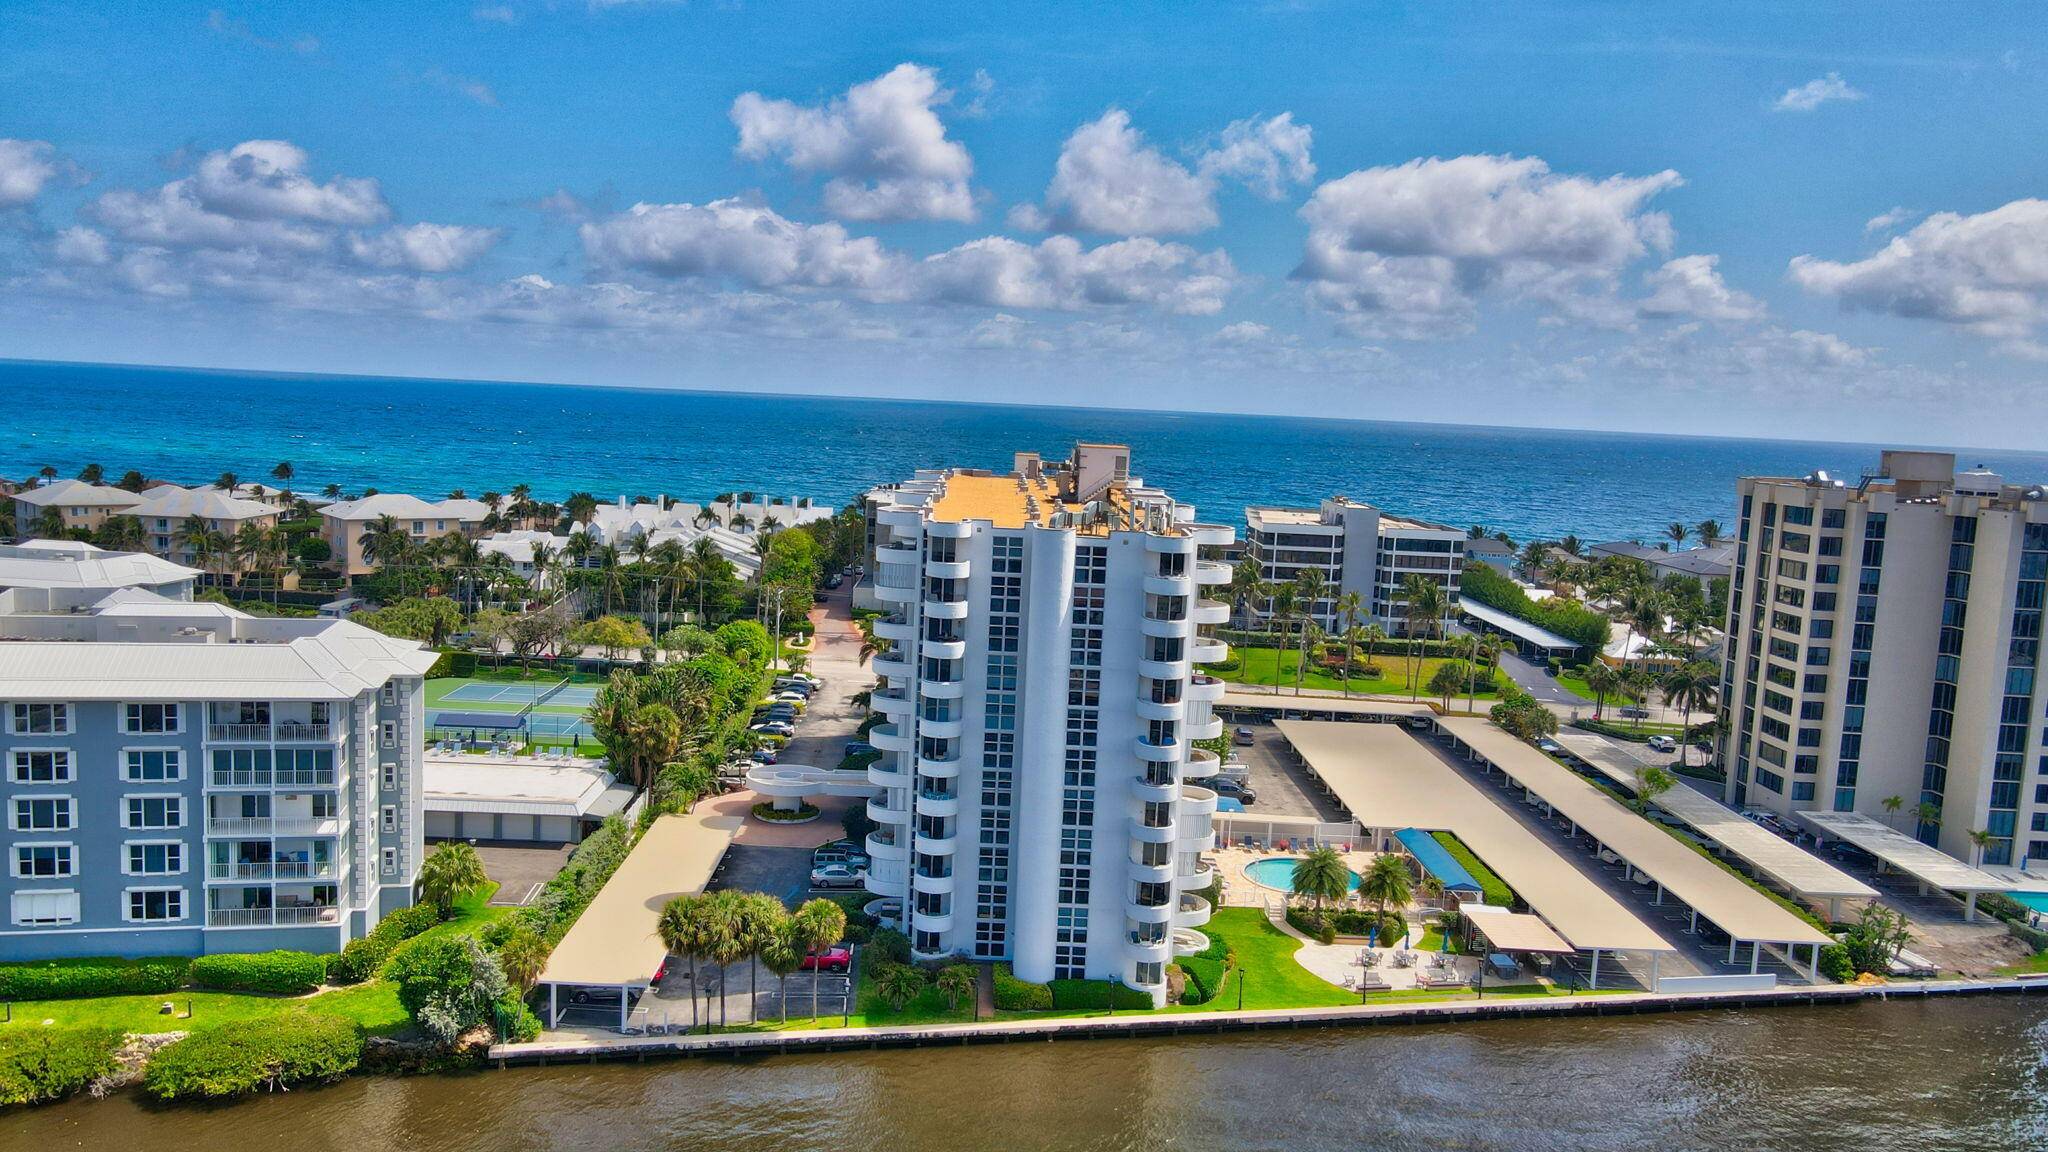 THIS SPACIOUS TWO BEDROOM TWO BATH WATERFRONT RESIDENCE IS SITUATED ON THE FAMOUS A1A.